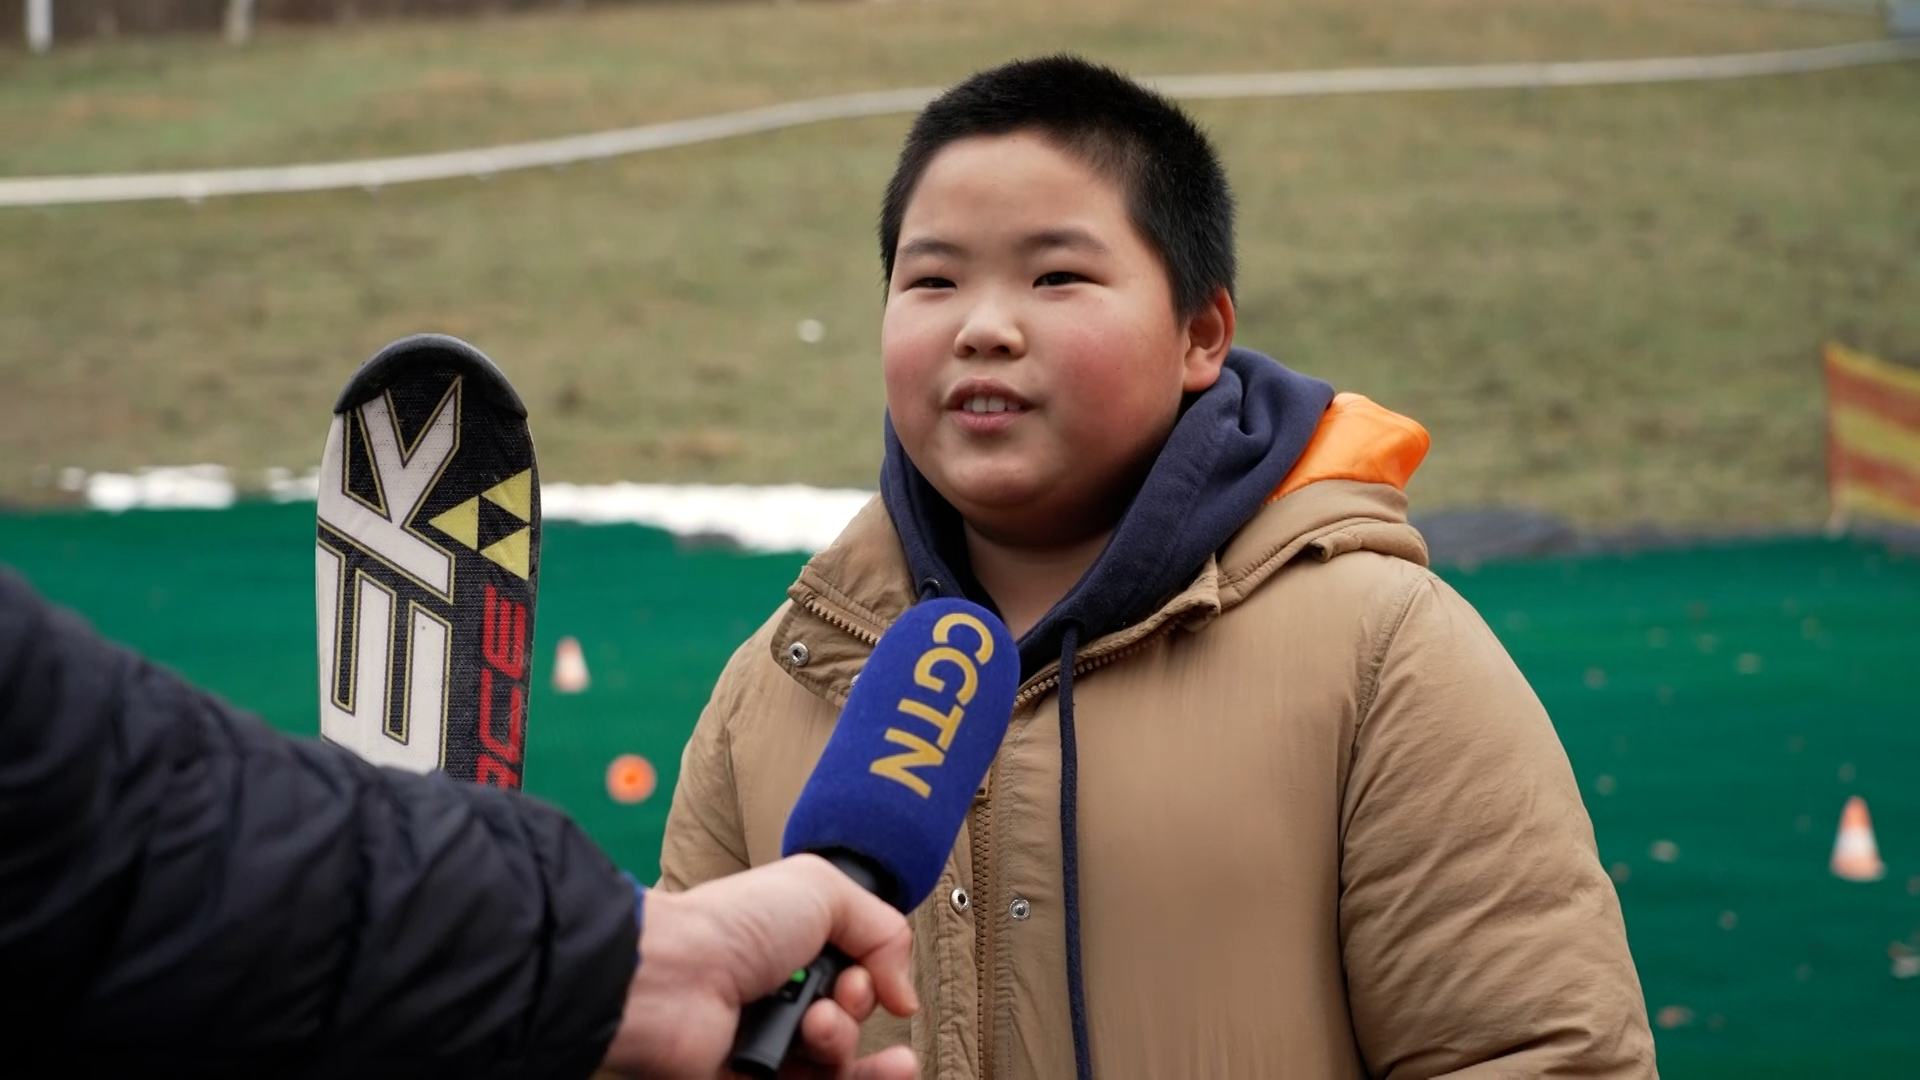 Before his first ride on the plastic slope, Yesheng Li said he was a bit scared. /Dworschak/CGTN